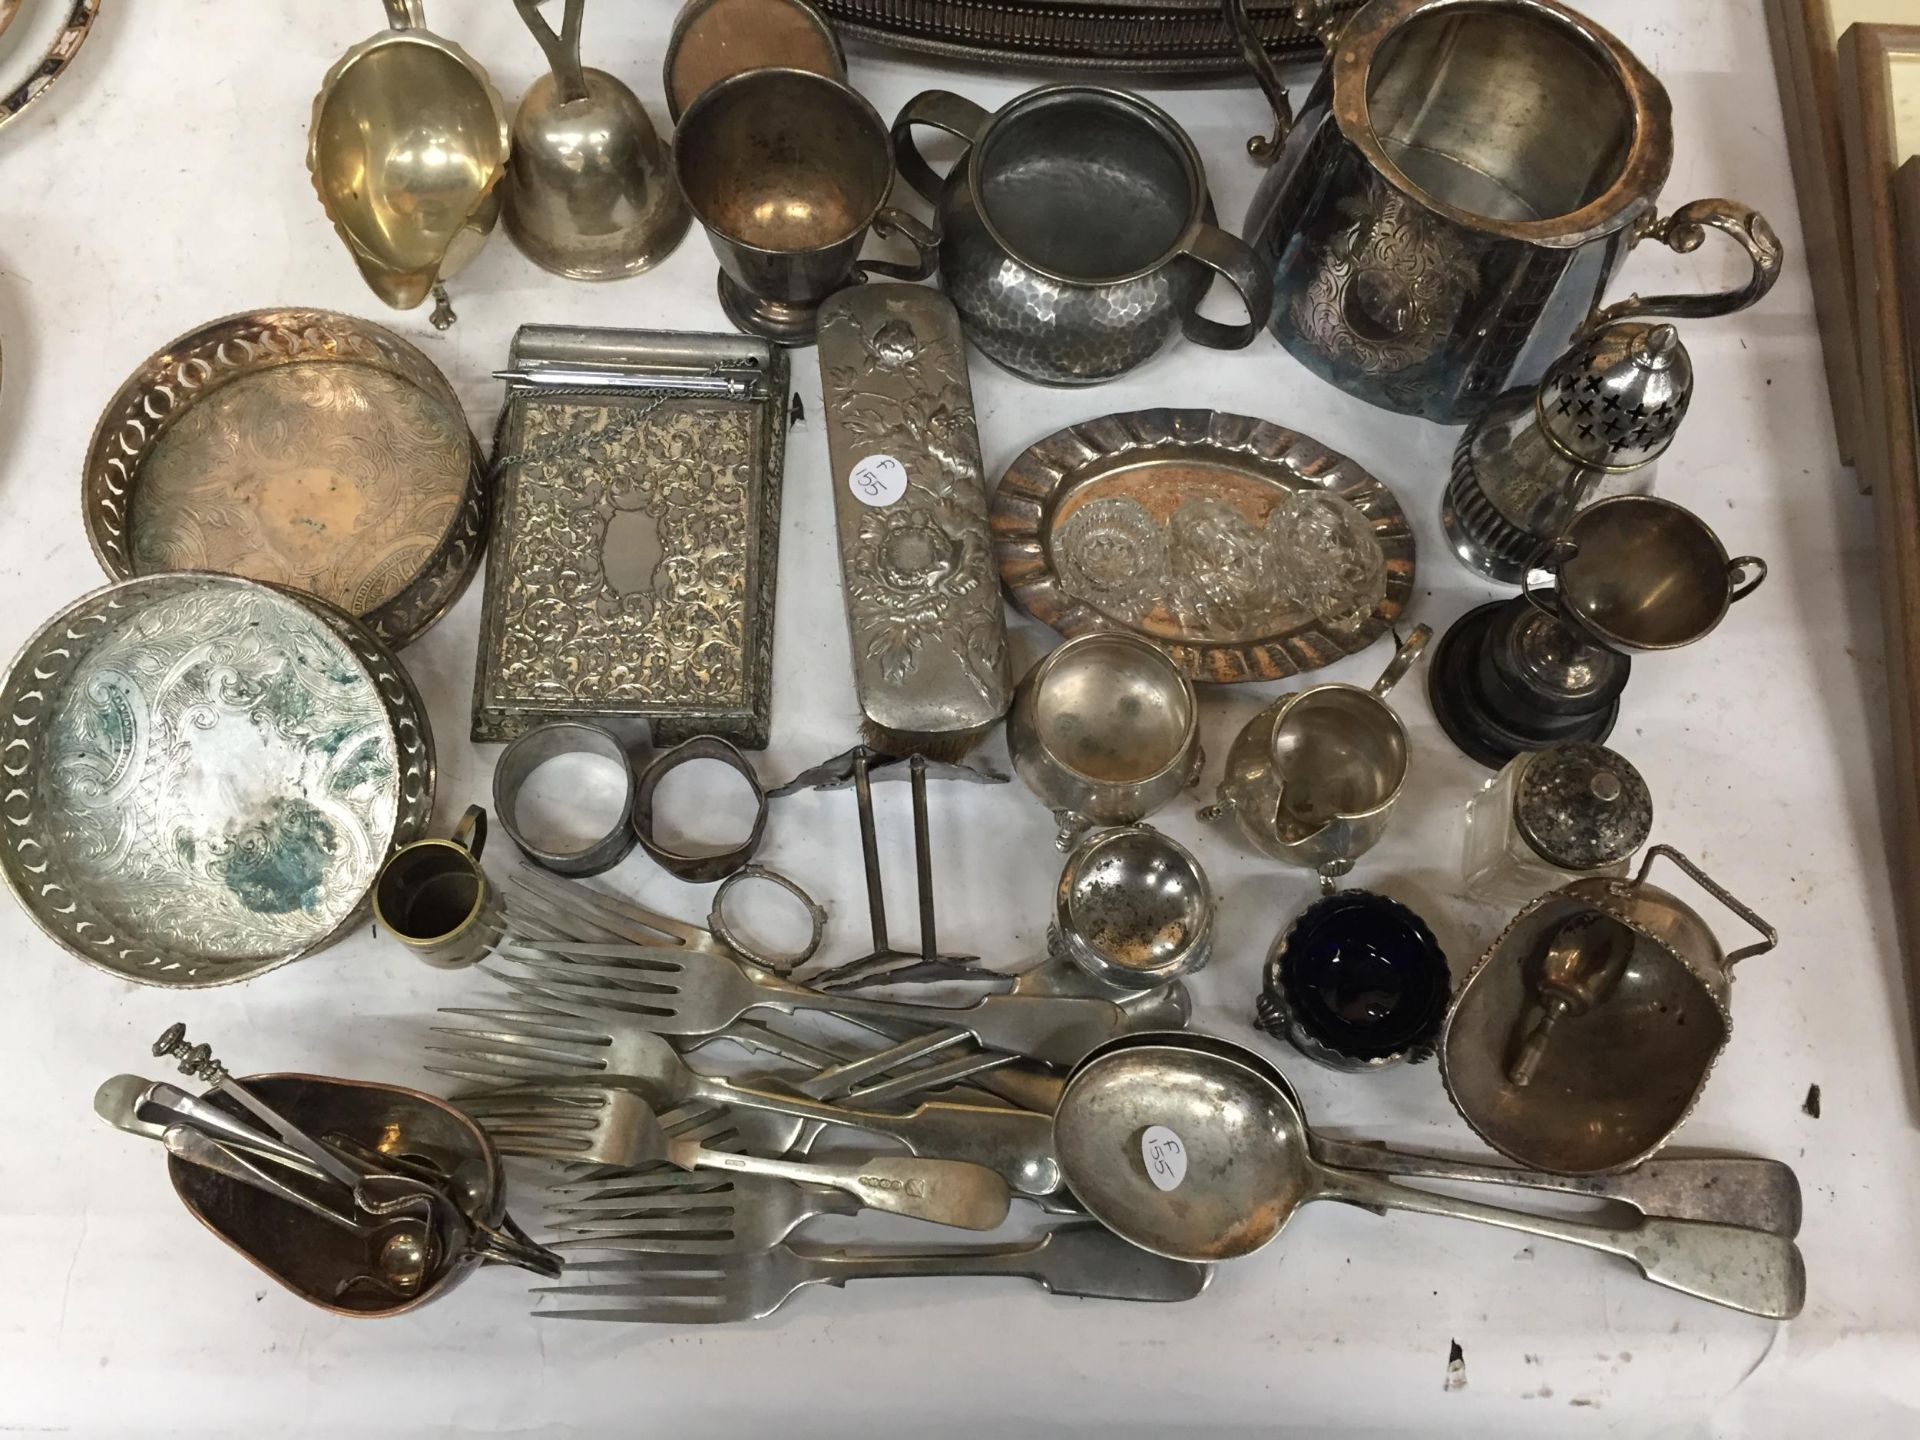 A LARGE QUANTITY OF WHITE METAL AND SILVER PLATE ITEMS TO INCLUDE A TRAY, SIX GOBLETS, FLATWARE, ETC - Image 3 of 3